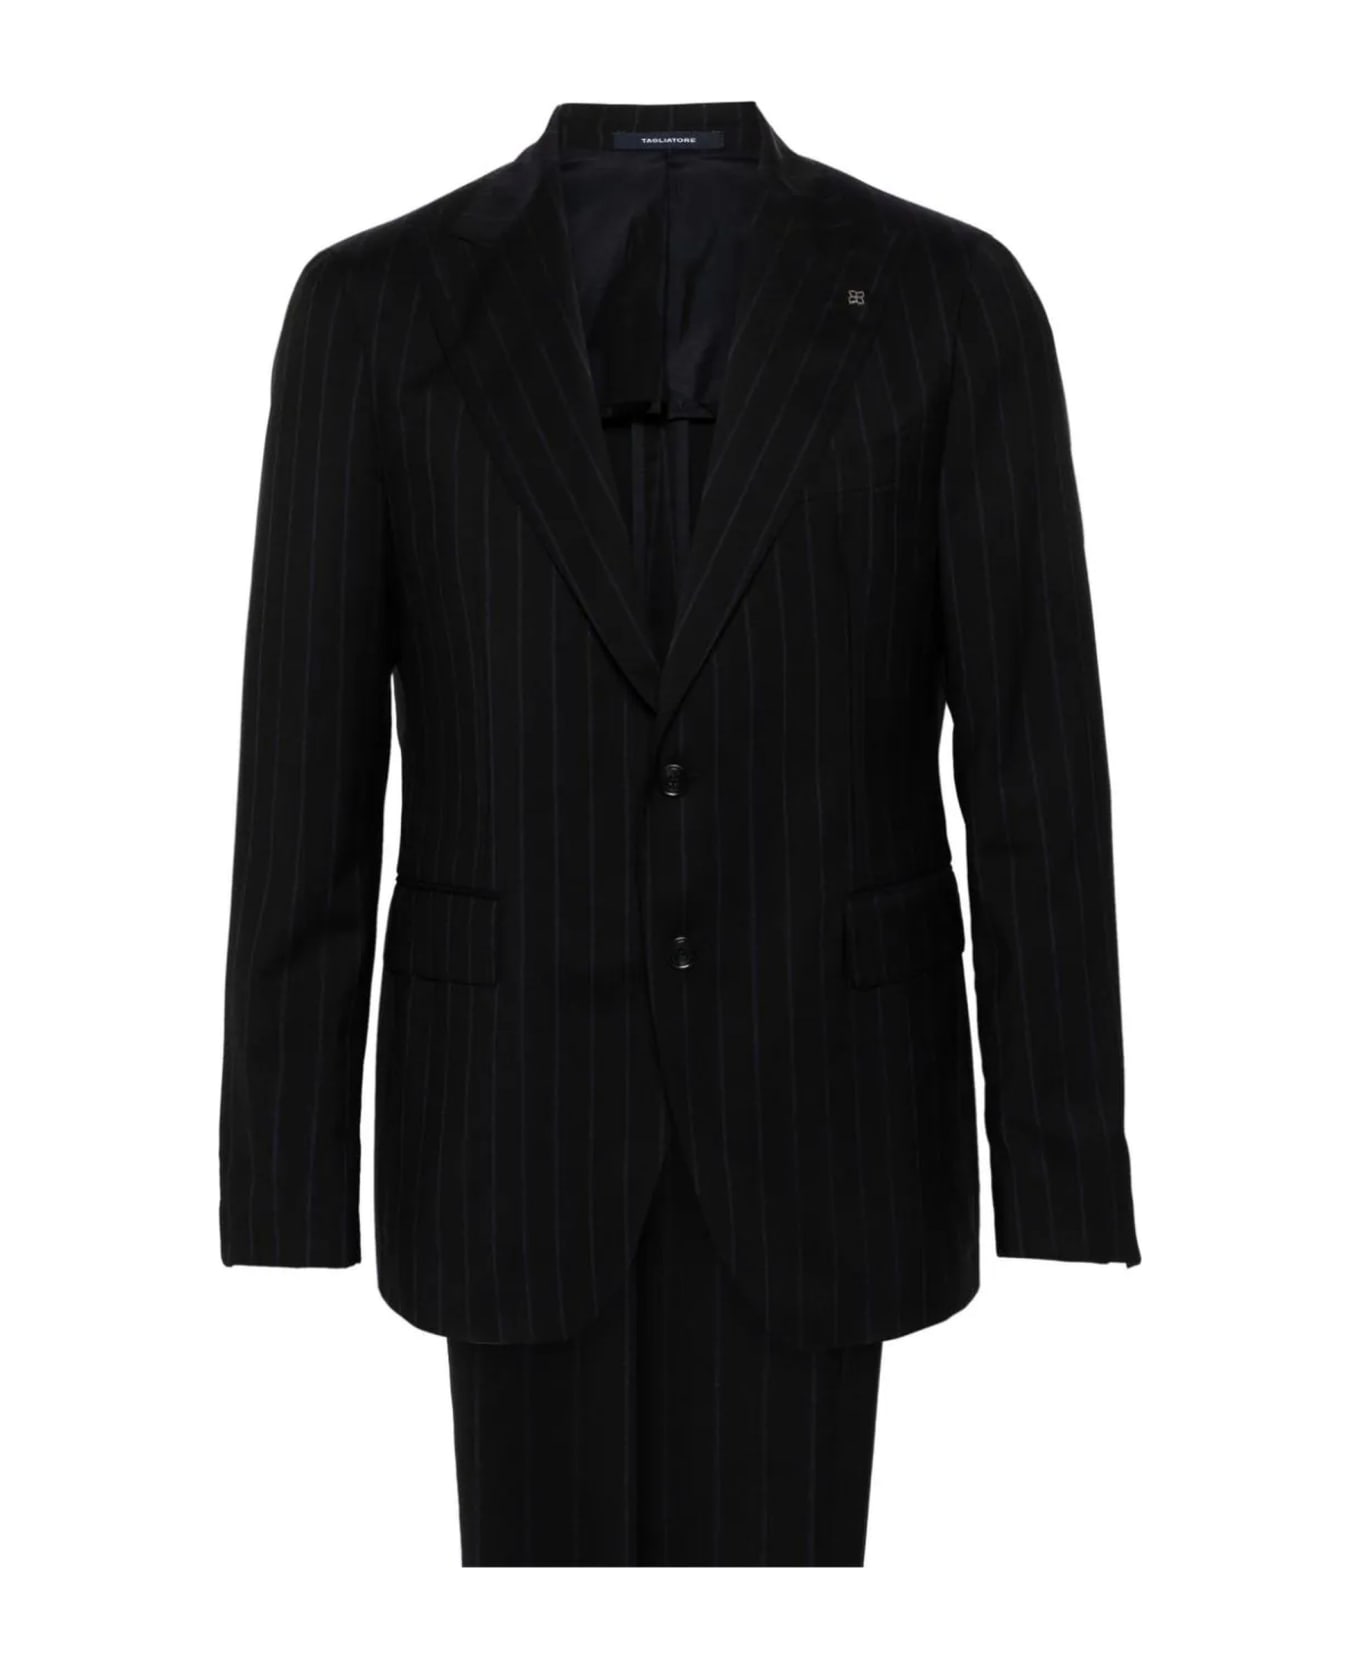 Tagliatore Dark Blue Pinstriped Double-breasted Wool Suit - Blue スーツ